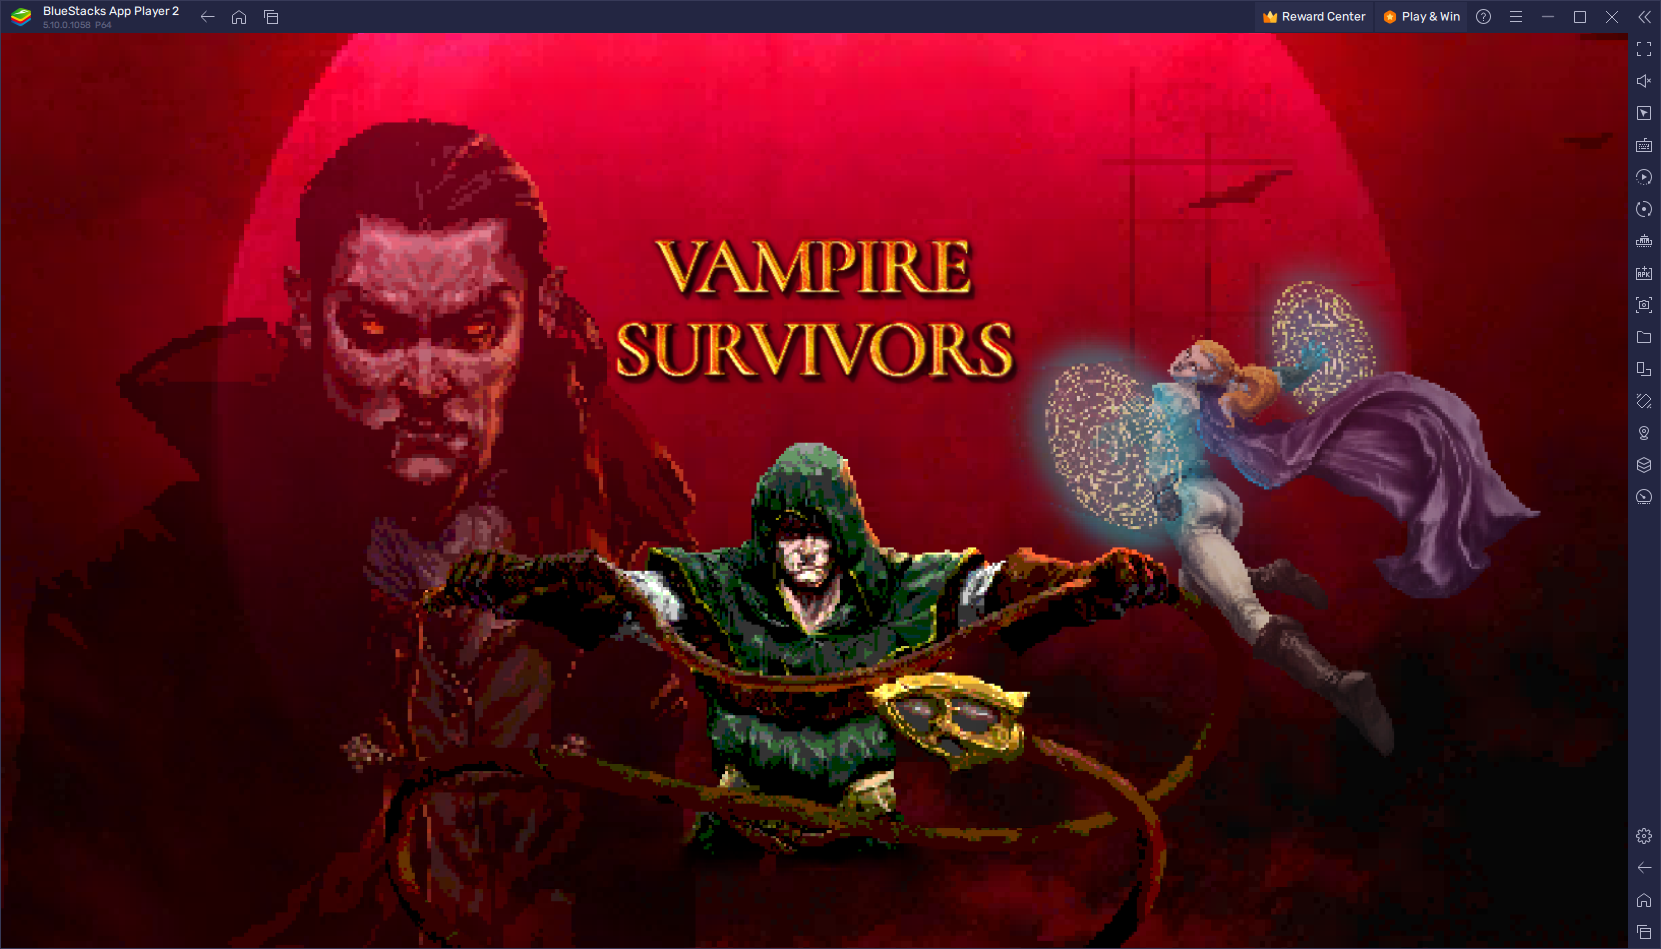 Beginner’s Guide for Vampire Survivors - Everything You Need to Know Before Getting Started